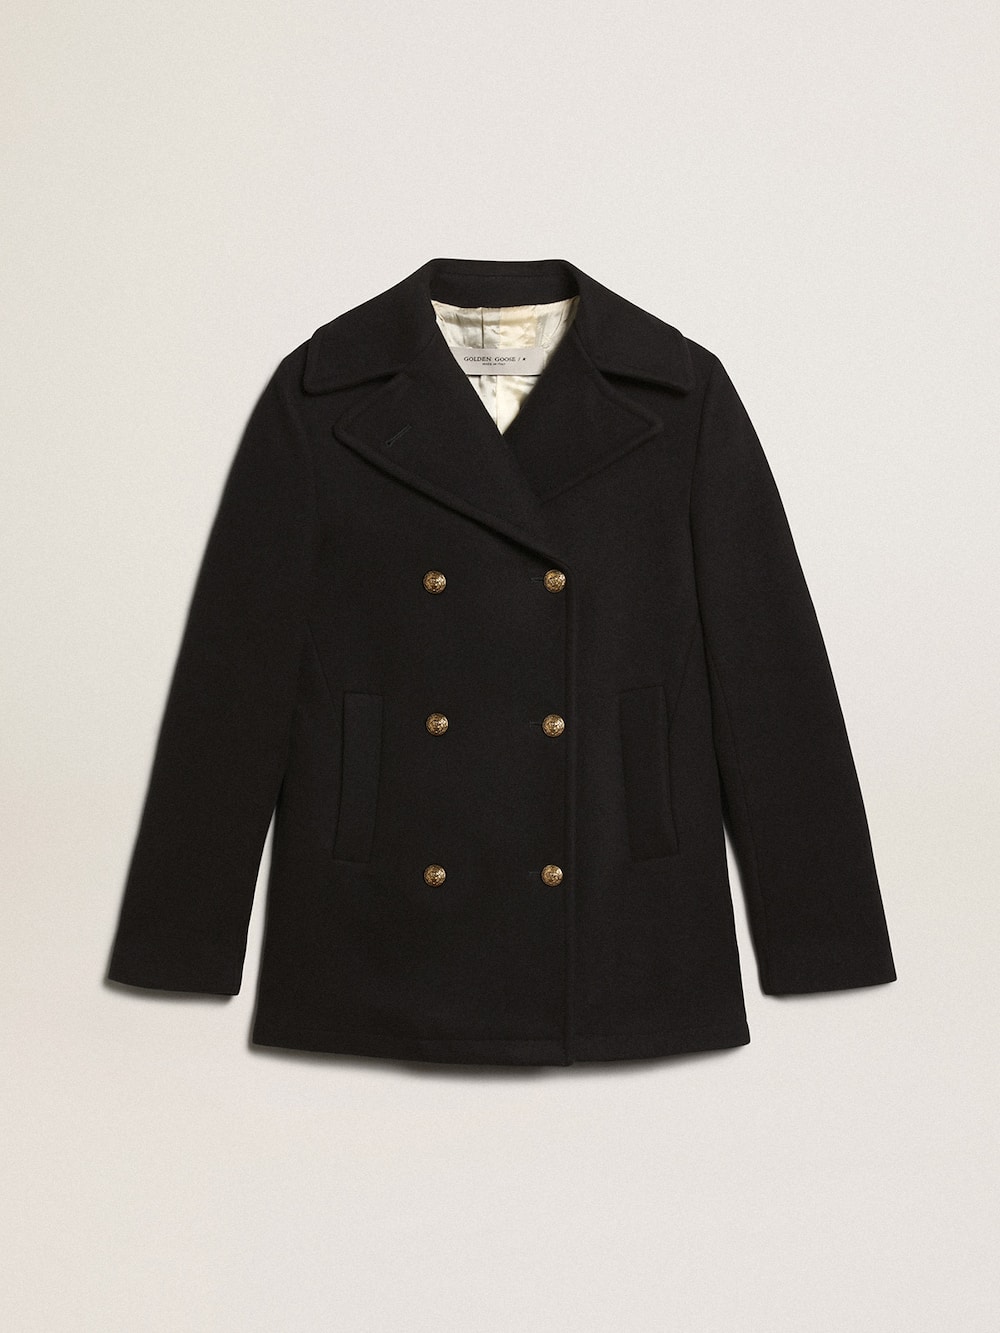 Golden Goose - Women’s dark blue peacoat with gold-colored heraldic buttons in 